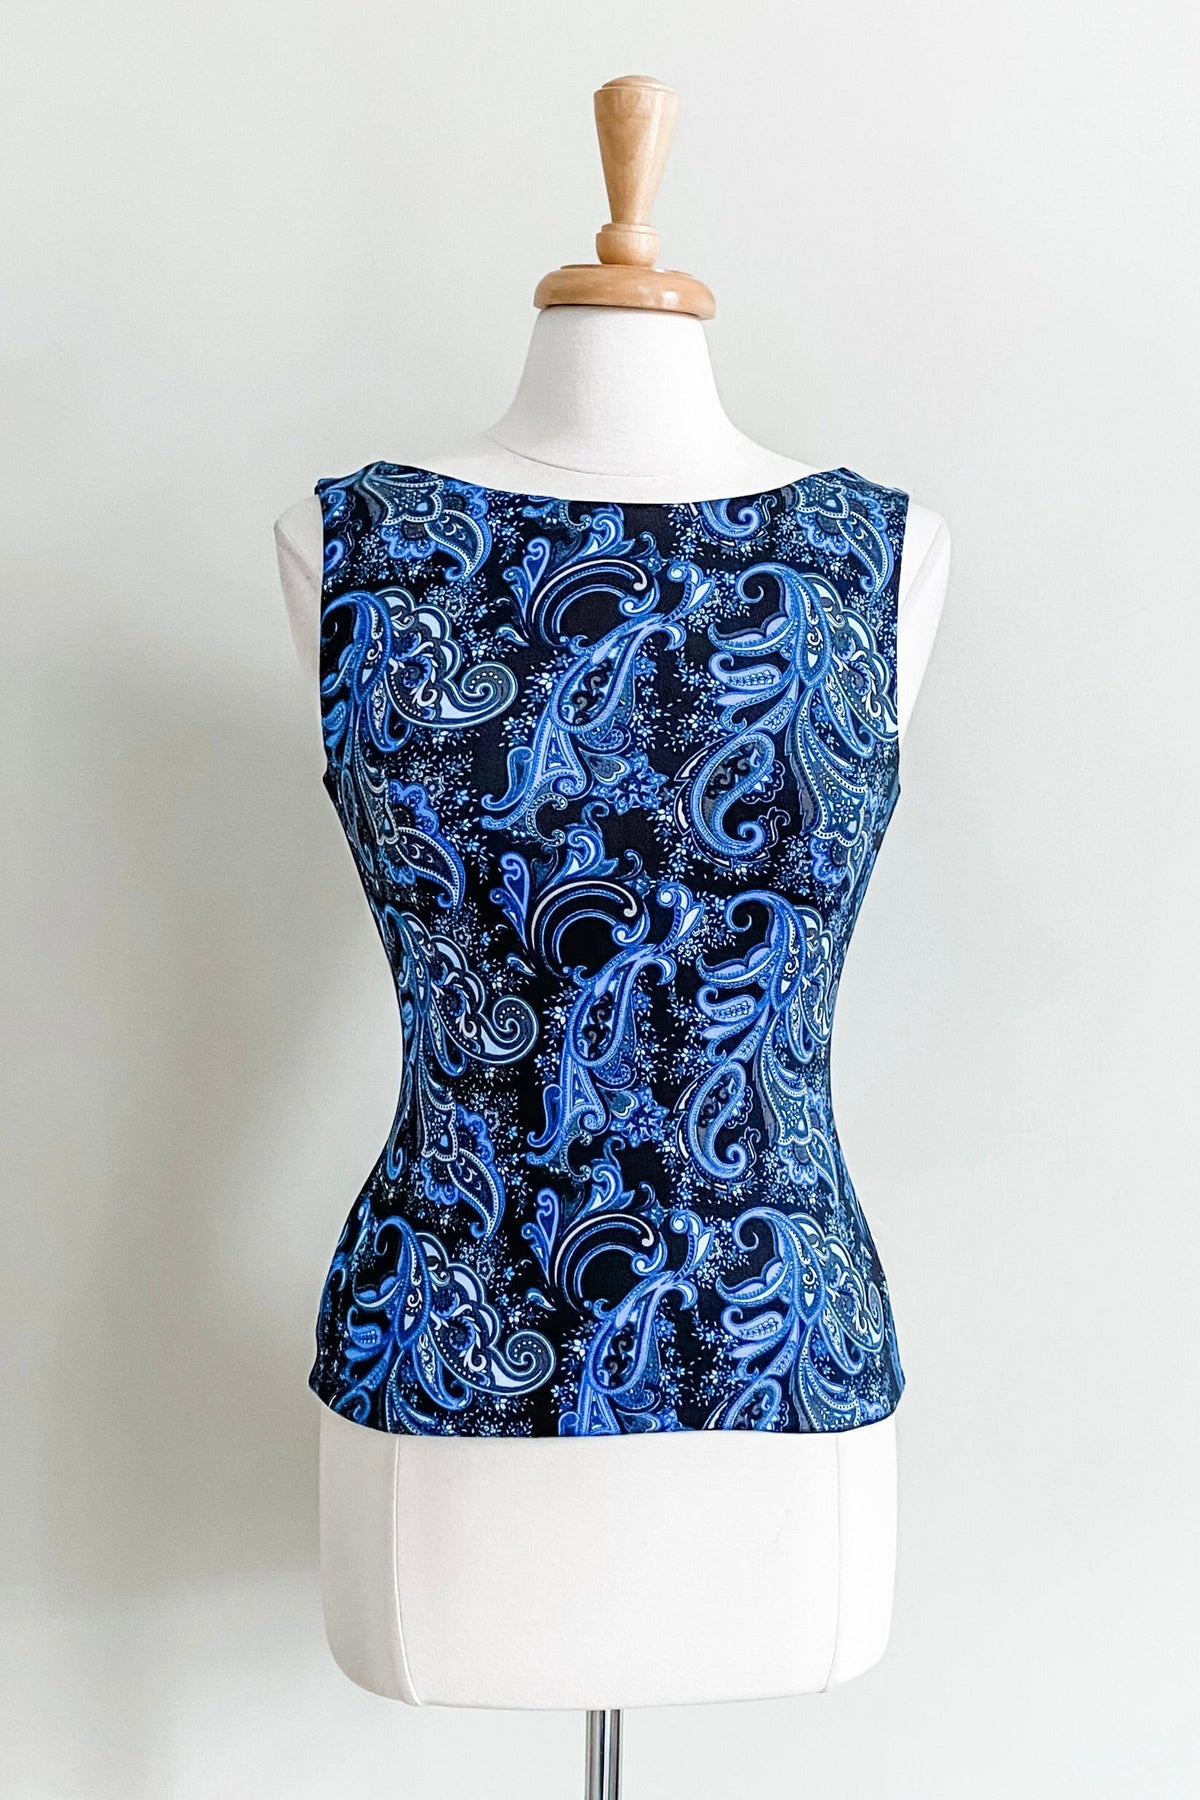 Diane Kroe Matching Reversible Bralette (Blue Paisley) - The Classic Capsule Collection